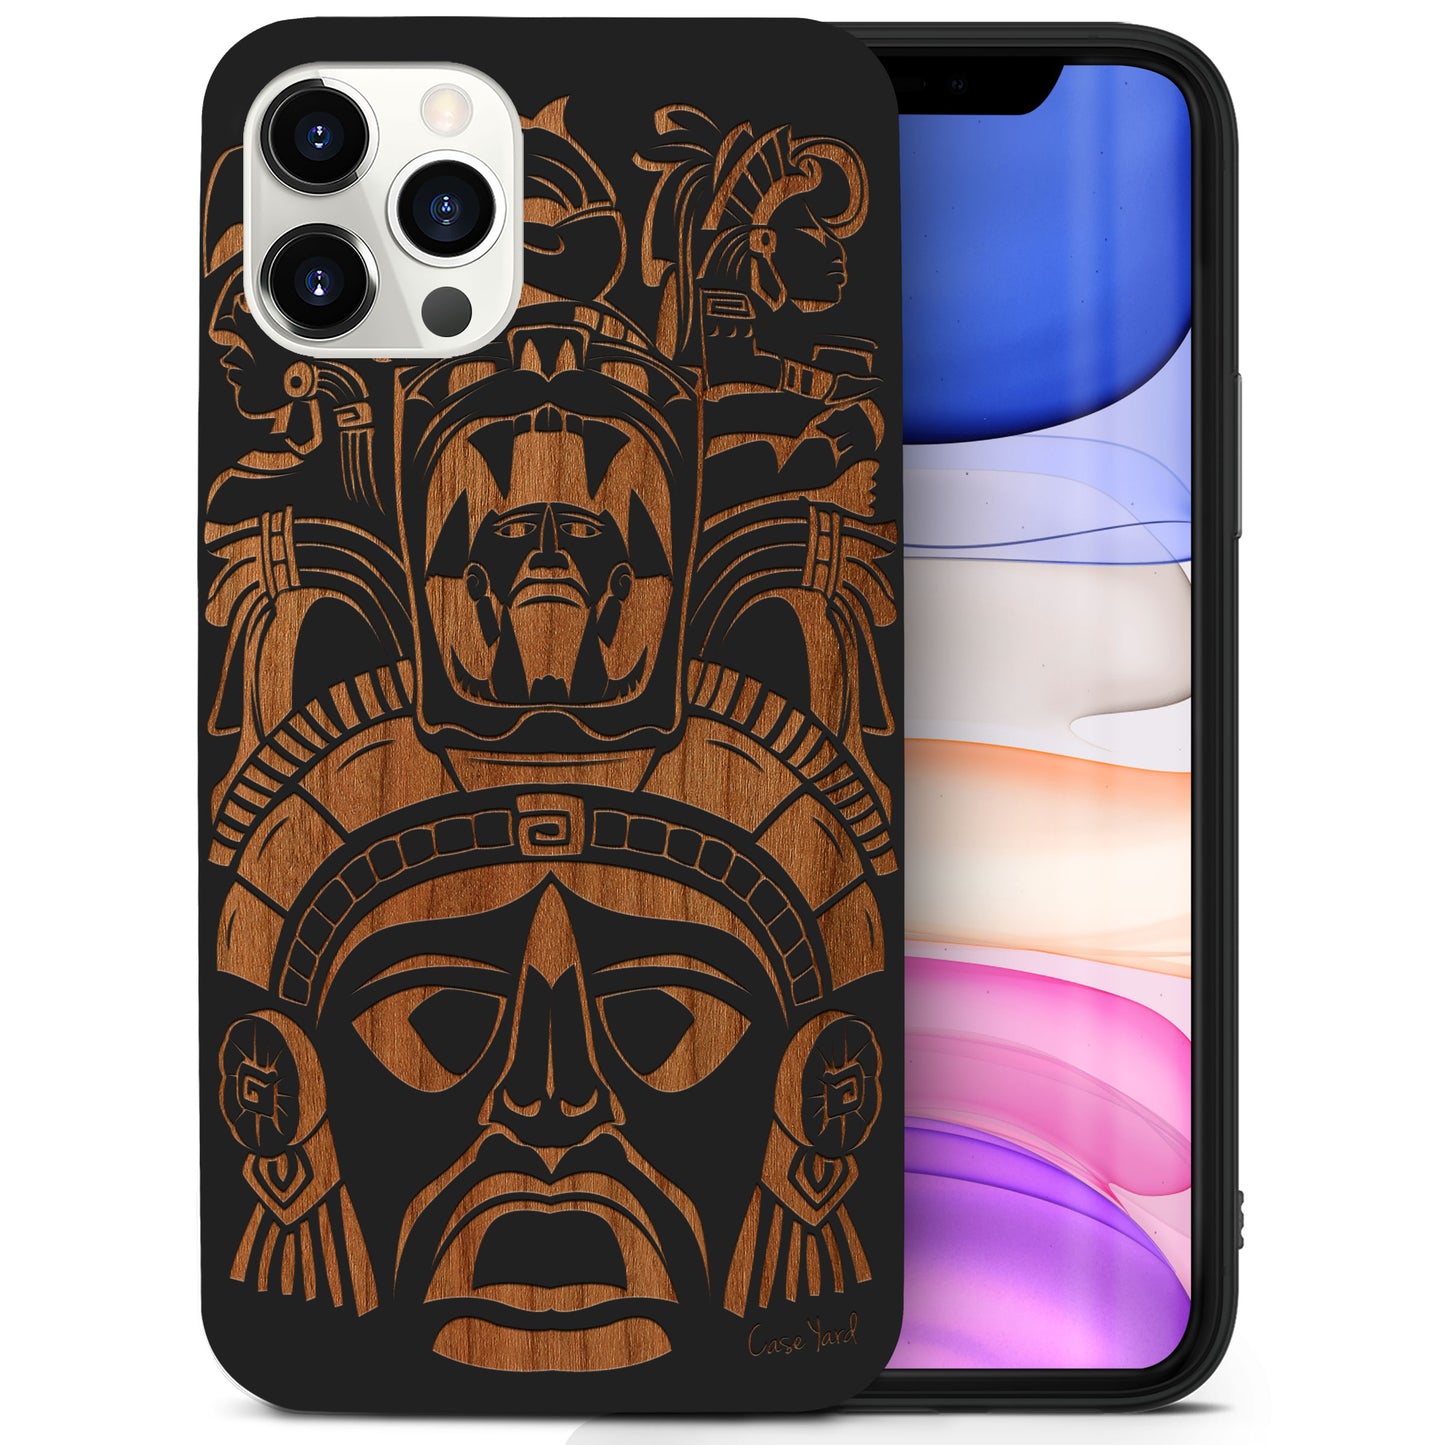 Wooden Cell Phone Case Cover, Laser Engraved case for iPhone & Samsung phone Tribal Mayan Mask Design